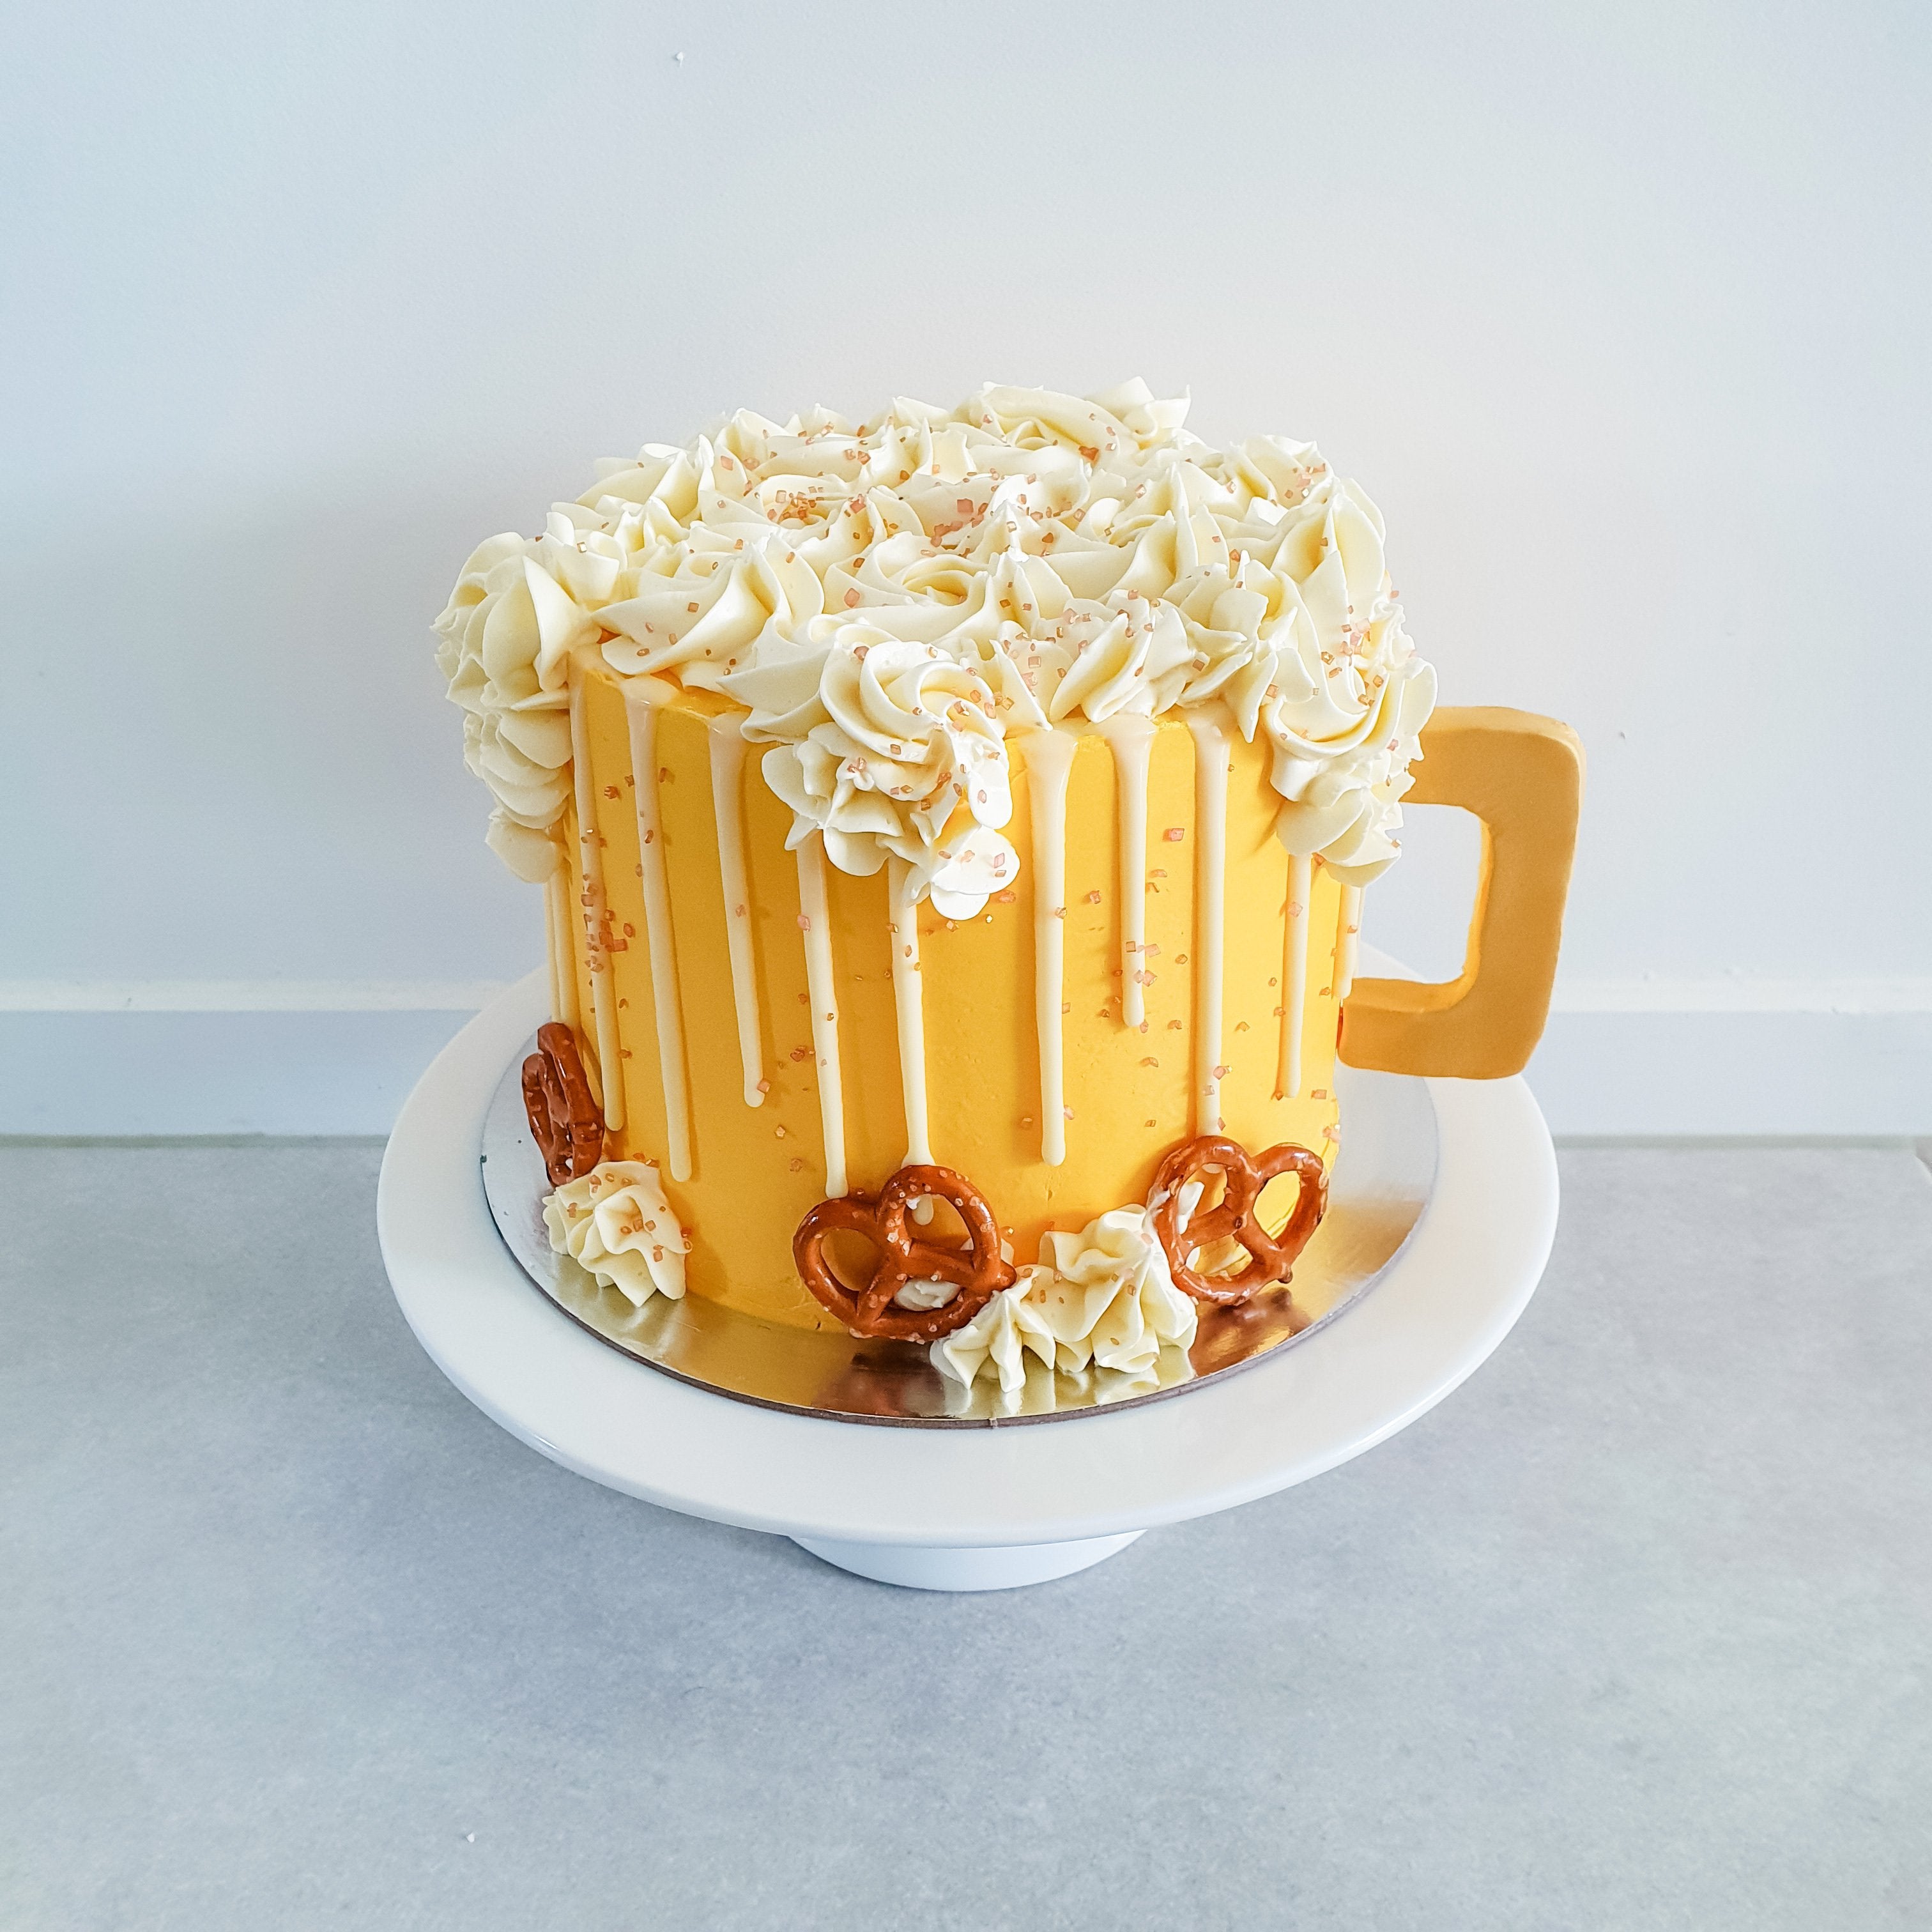 Made a beer mug cake for a friend's birthday : r/Baking